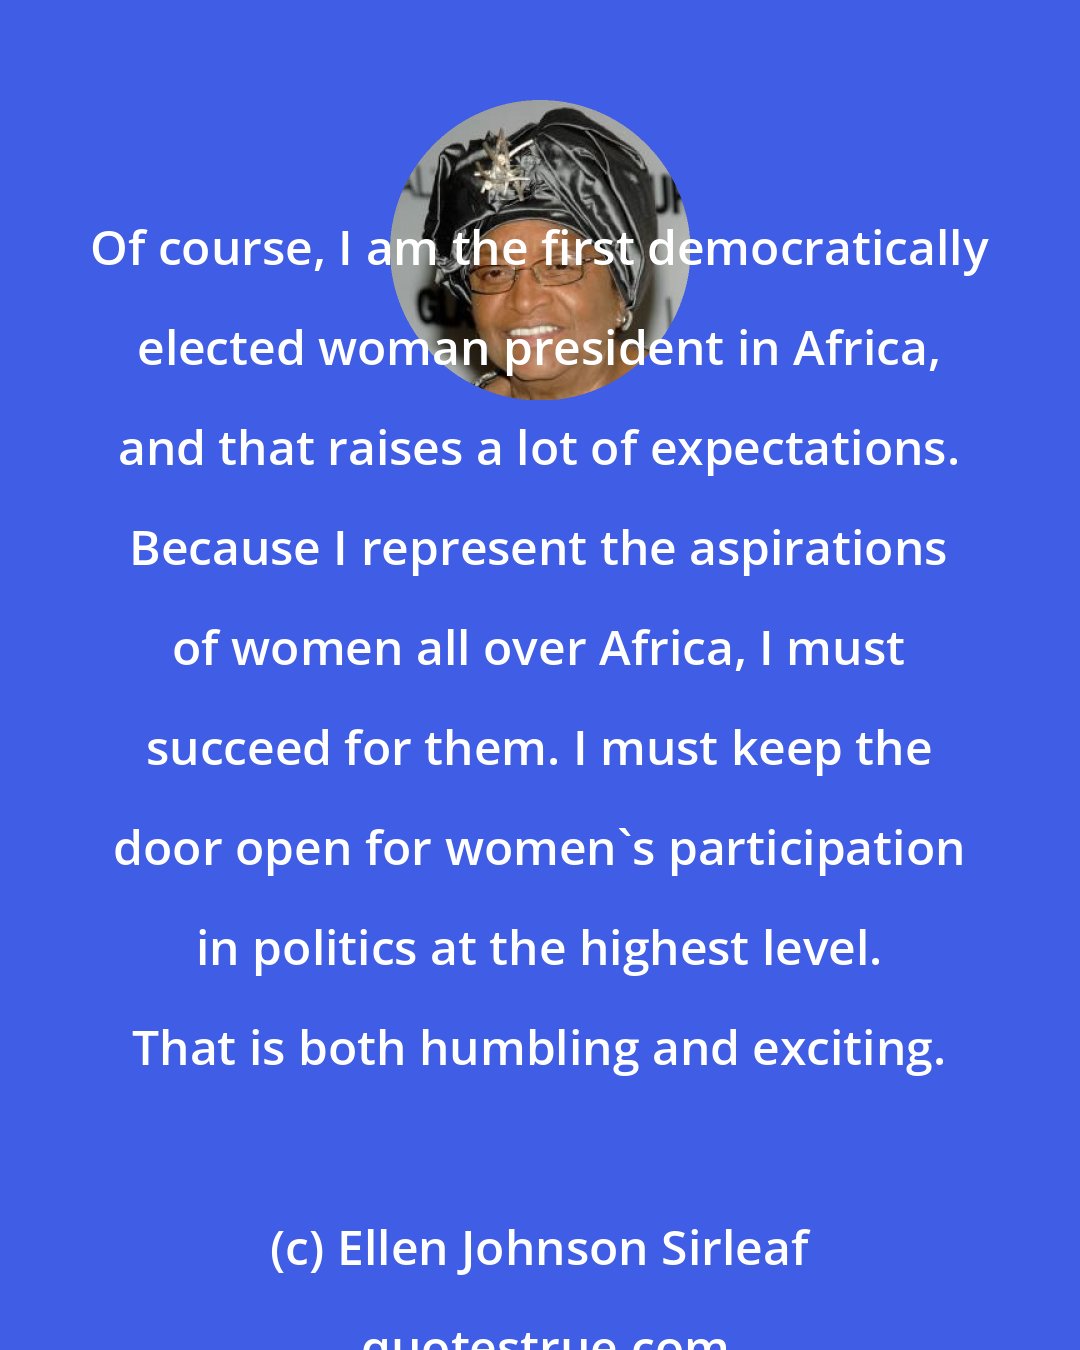 Ellen Johnson Sirleaf: Of course, I am the first democratically elected woman president in Africa, and that raises a lot of expectations. Because I represent the aspirations of women all over Africa, I must succeed for them. I must keep the door open for women's participation in politics at the highest level. That is both humbling and exciting.